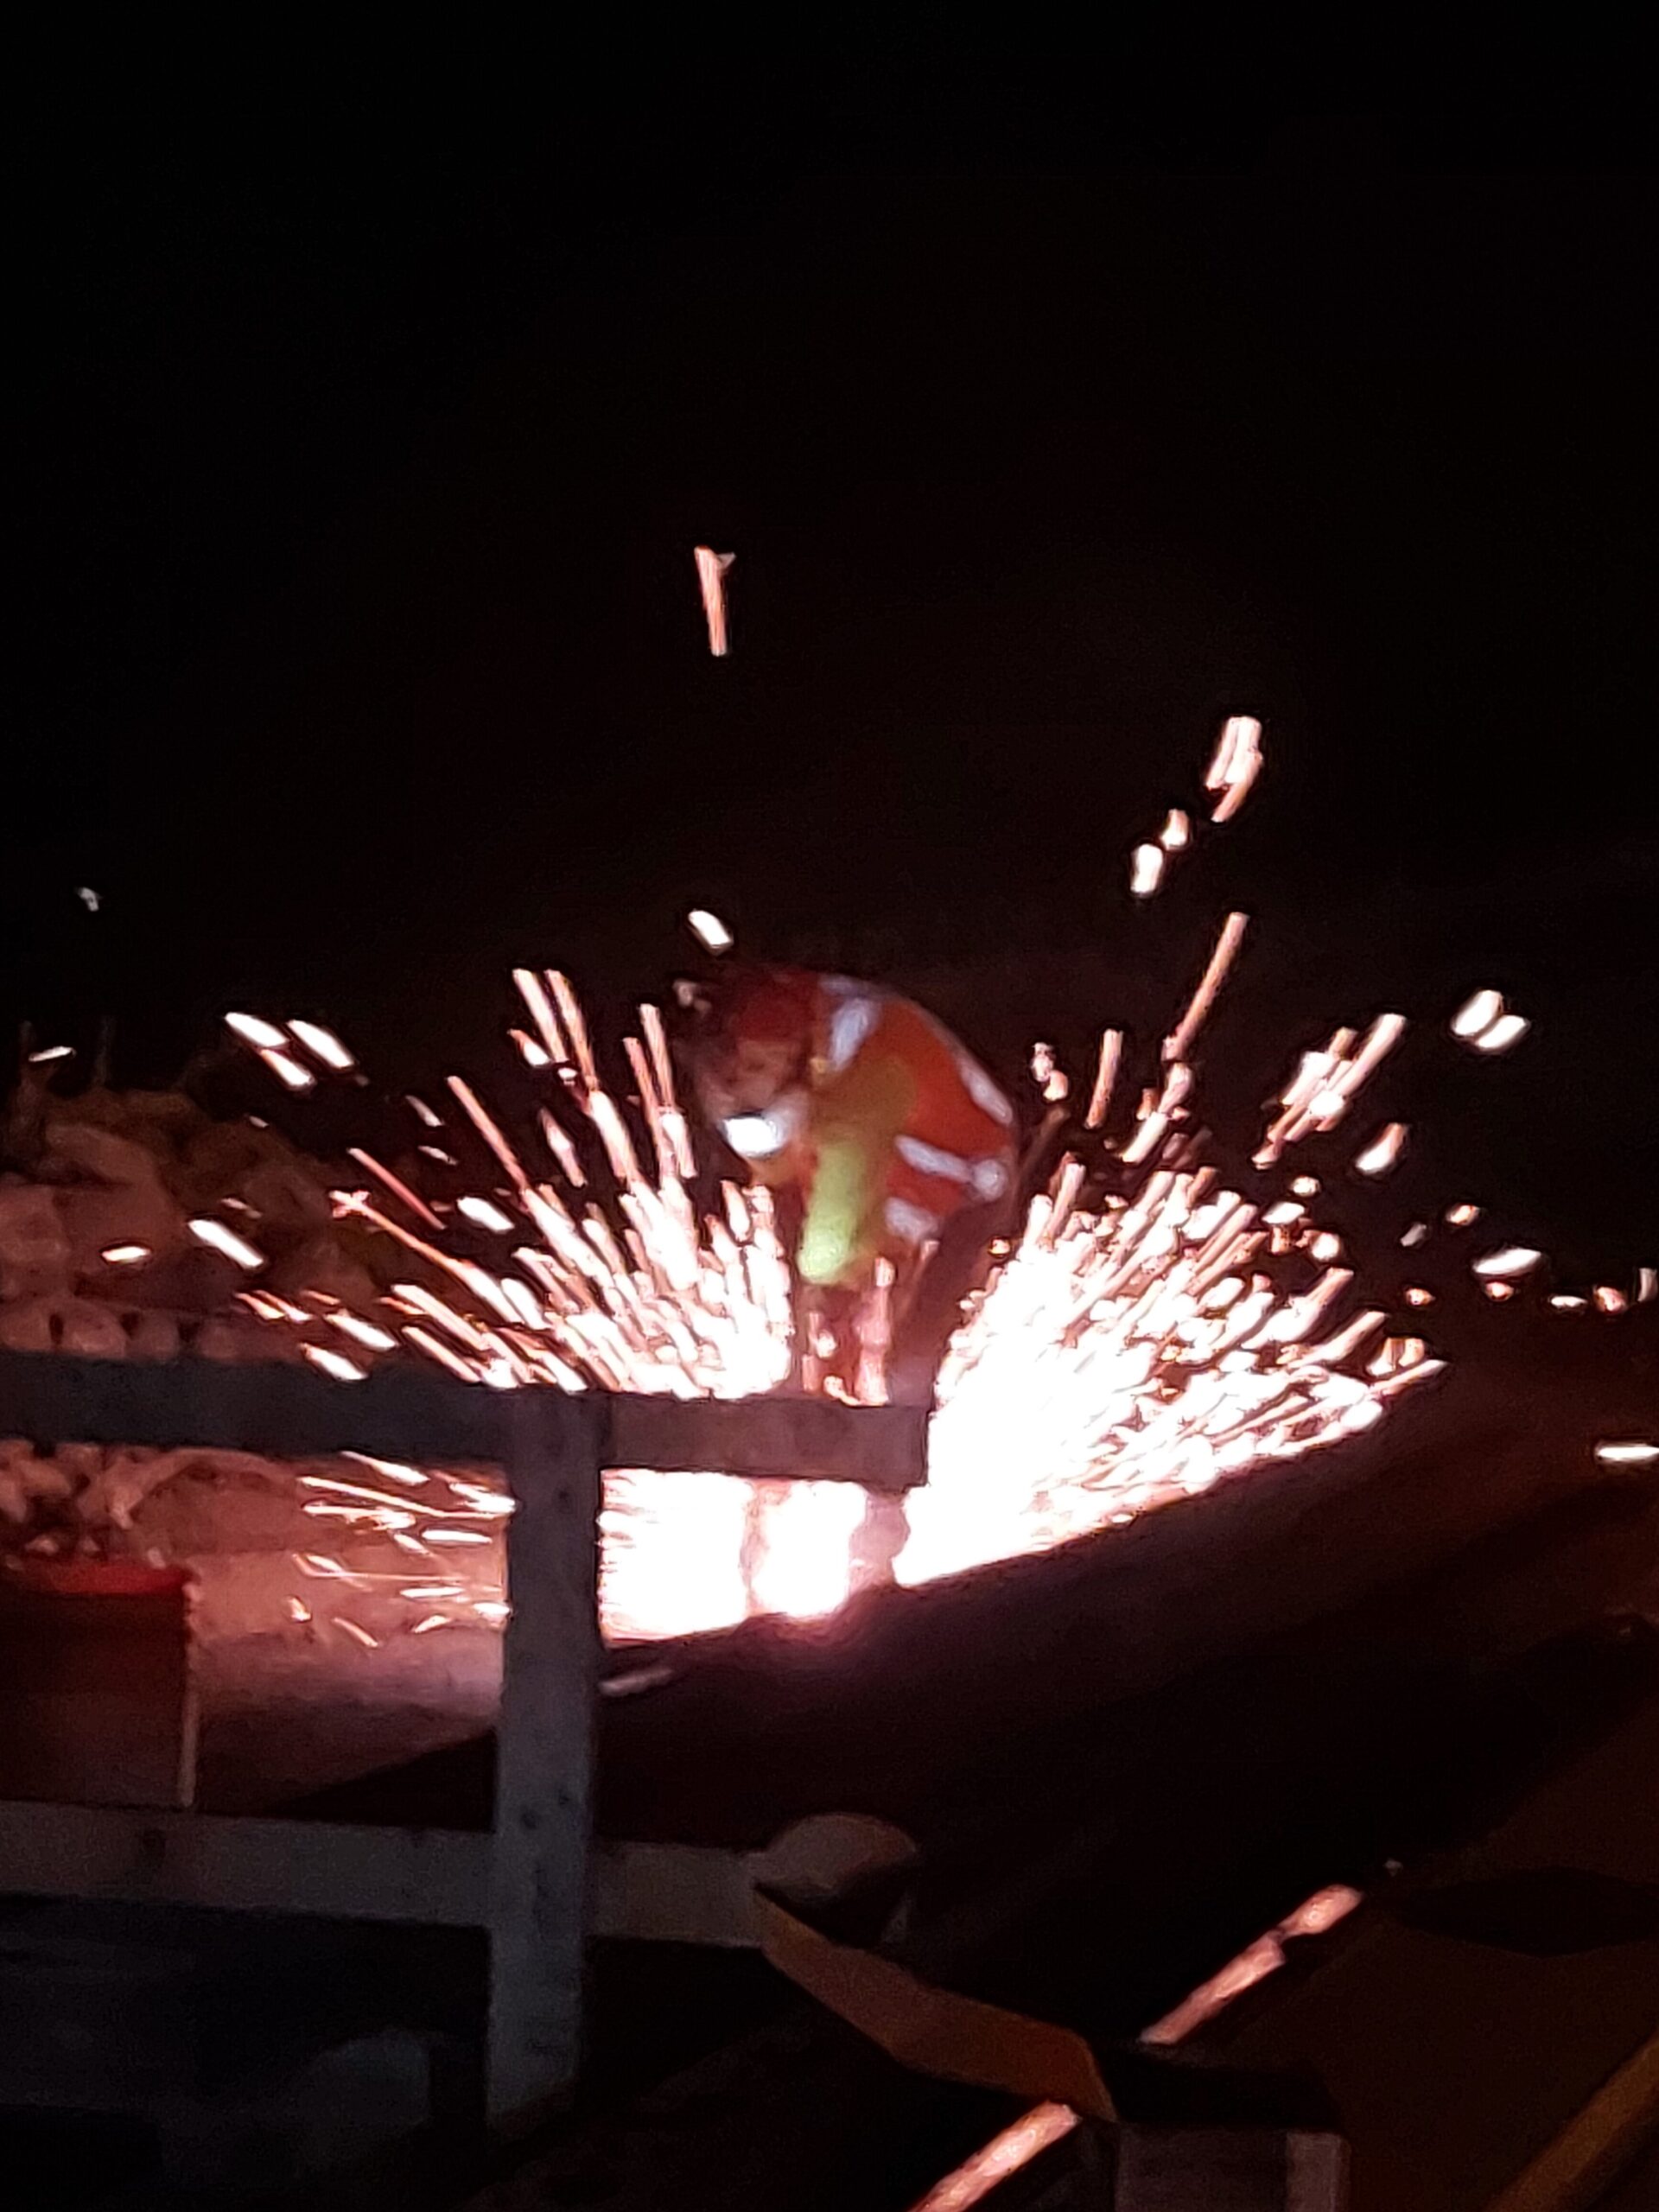 Cutting rebar for the reinforced steel panel repairs